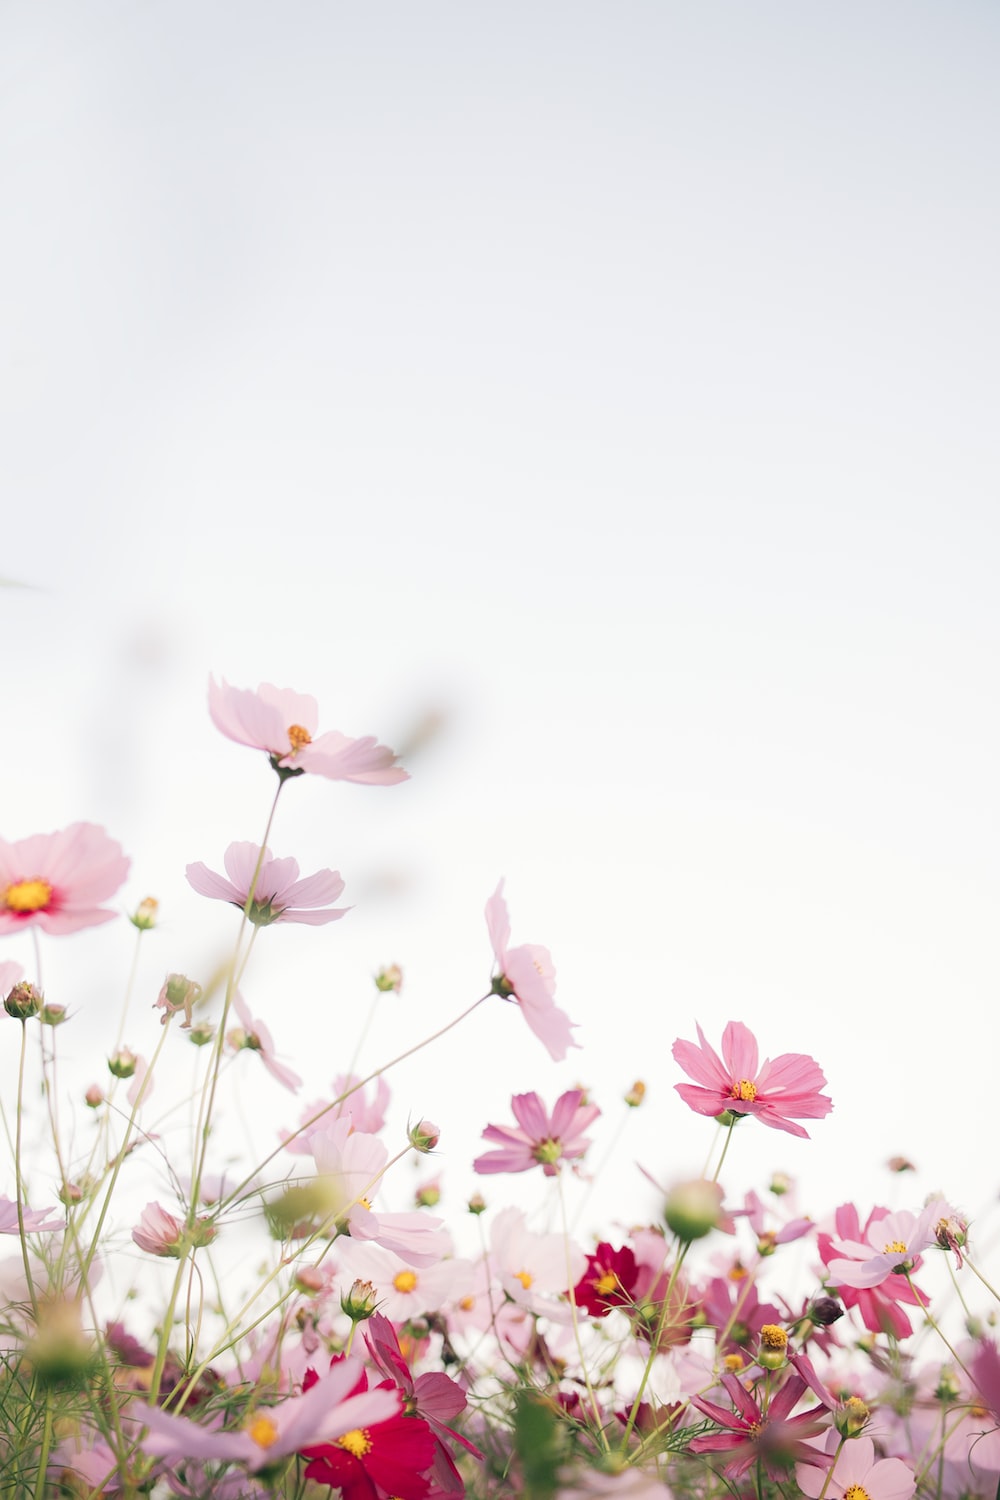 Cosmos Flower Picture. Download Free Image